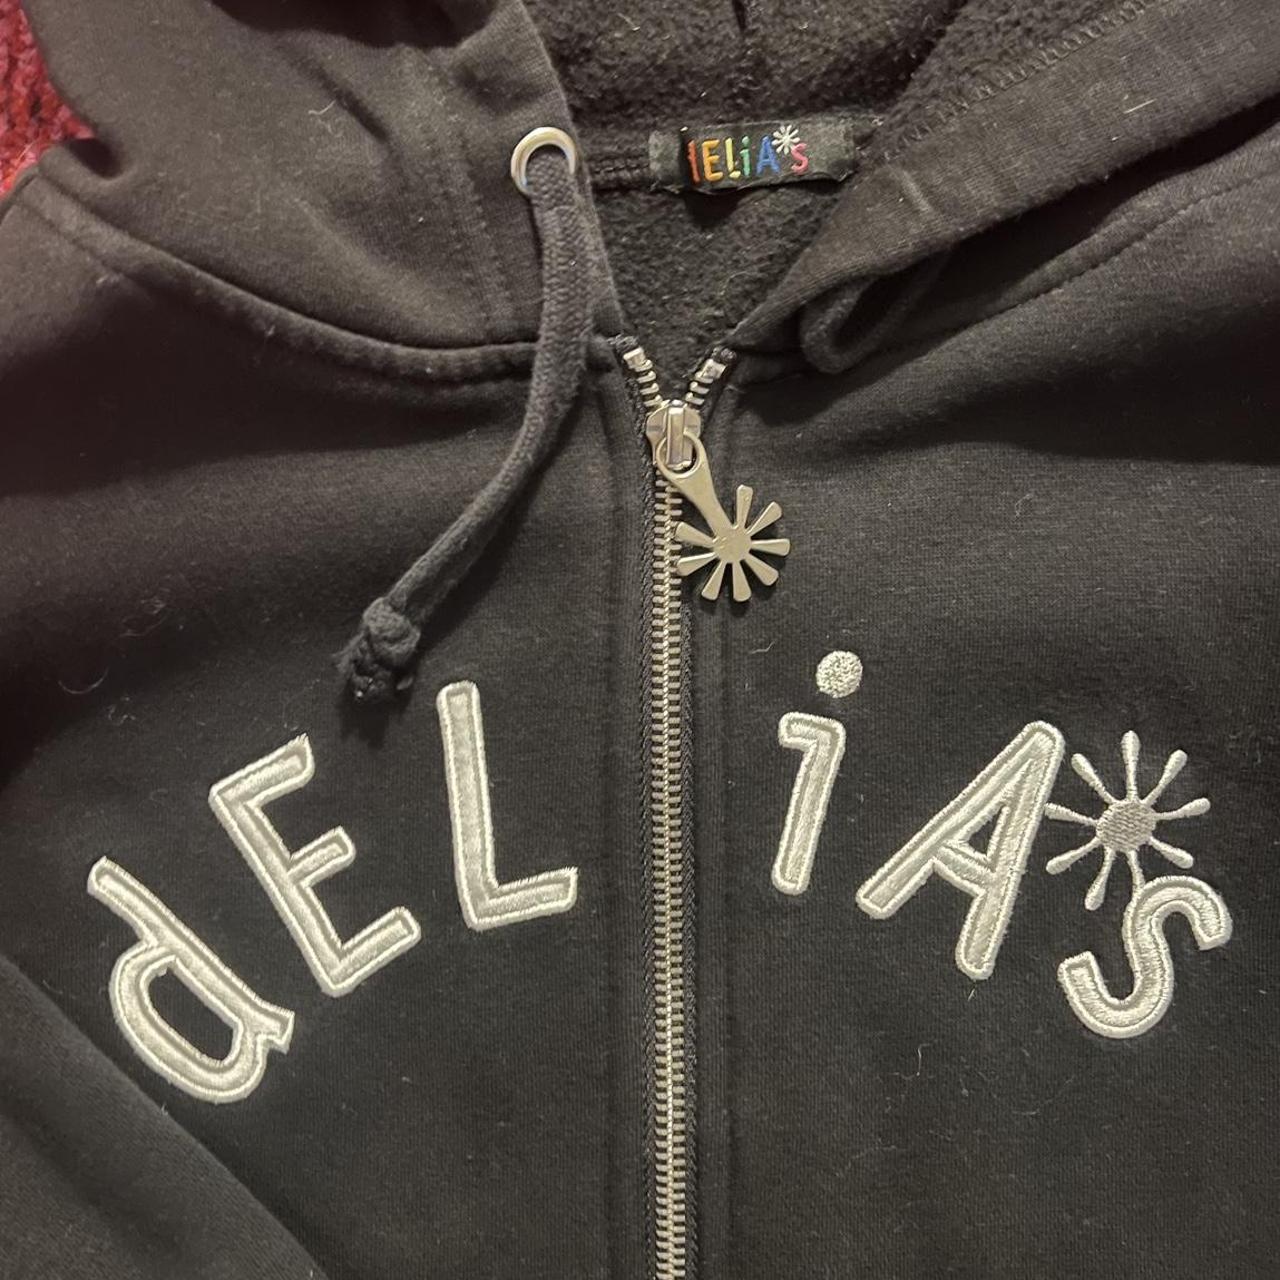 Delia's Women's Black and Silver Hoodie (2)